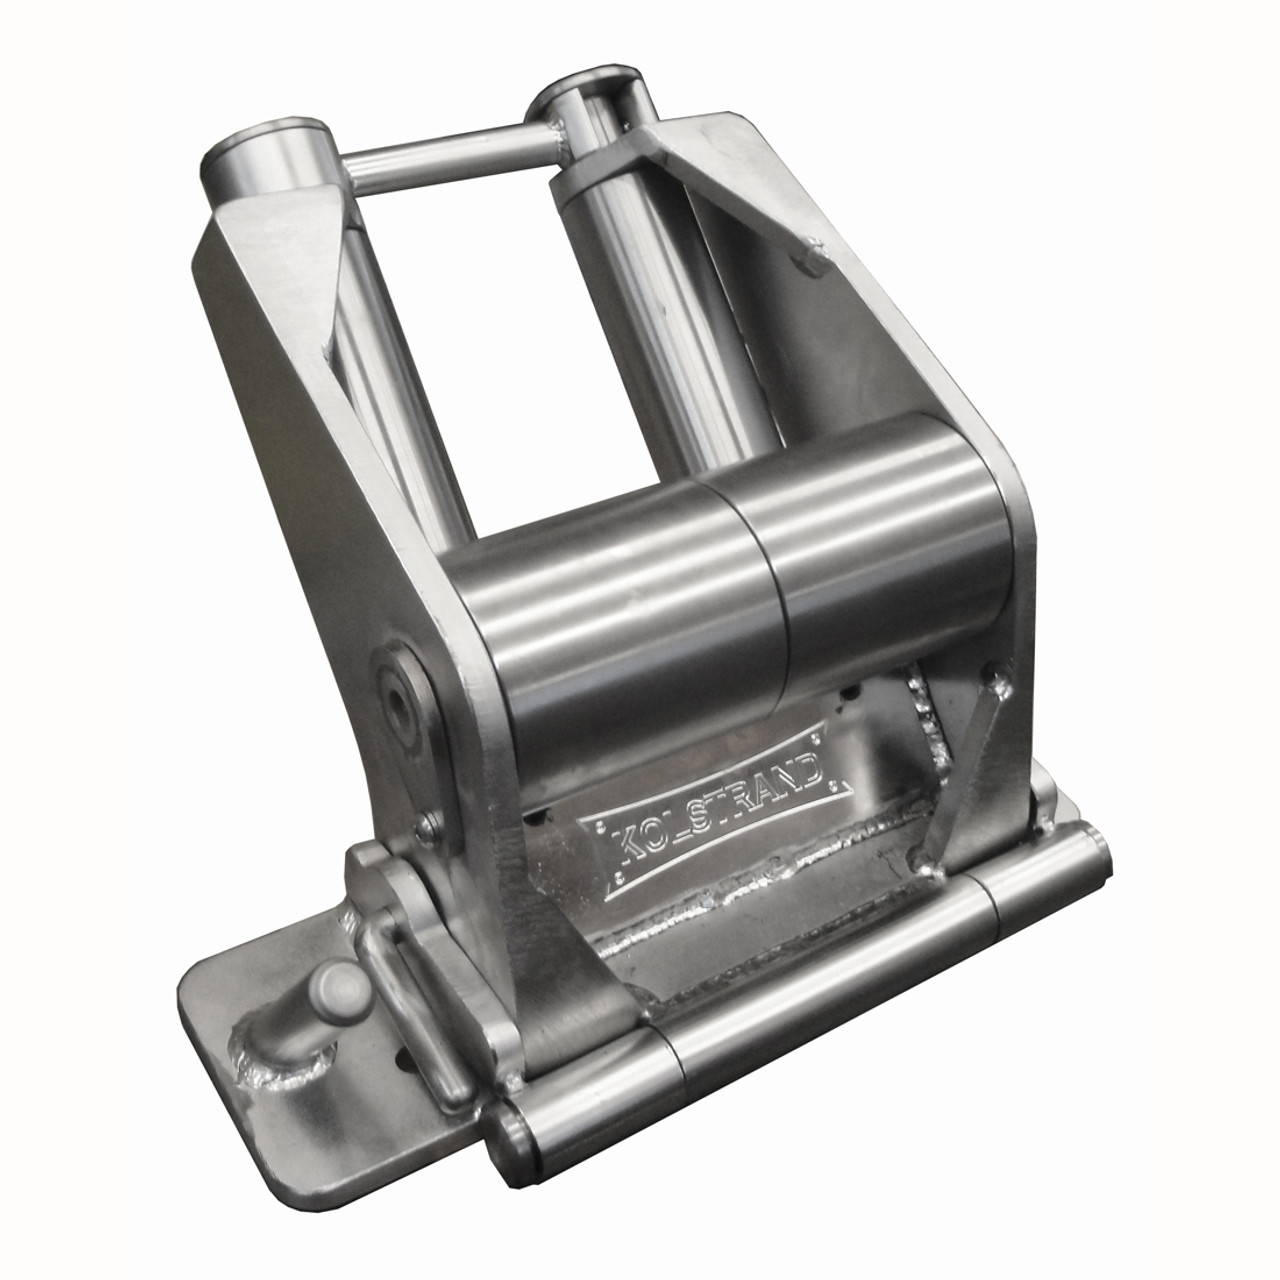 Kolstrand 'CAPTURED-4' RAIL-MOUNT Flip-Style STAINLESS STEEL Seine Davit Roller Assembly WITH FLIP-LINE LOCKING CONTAINMENT BAR for Starboard Side Fishing